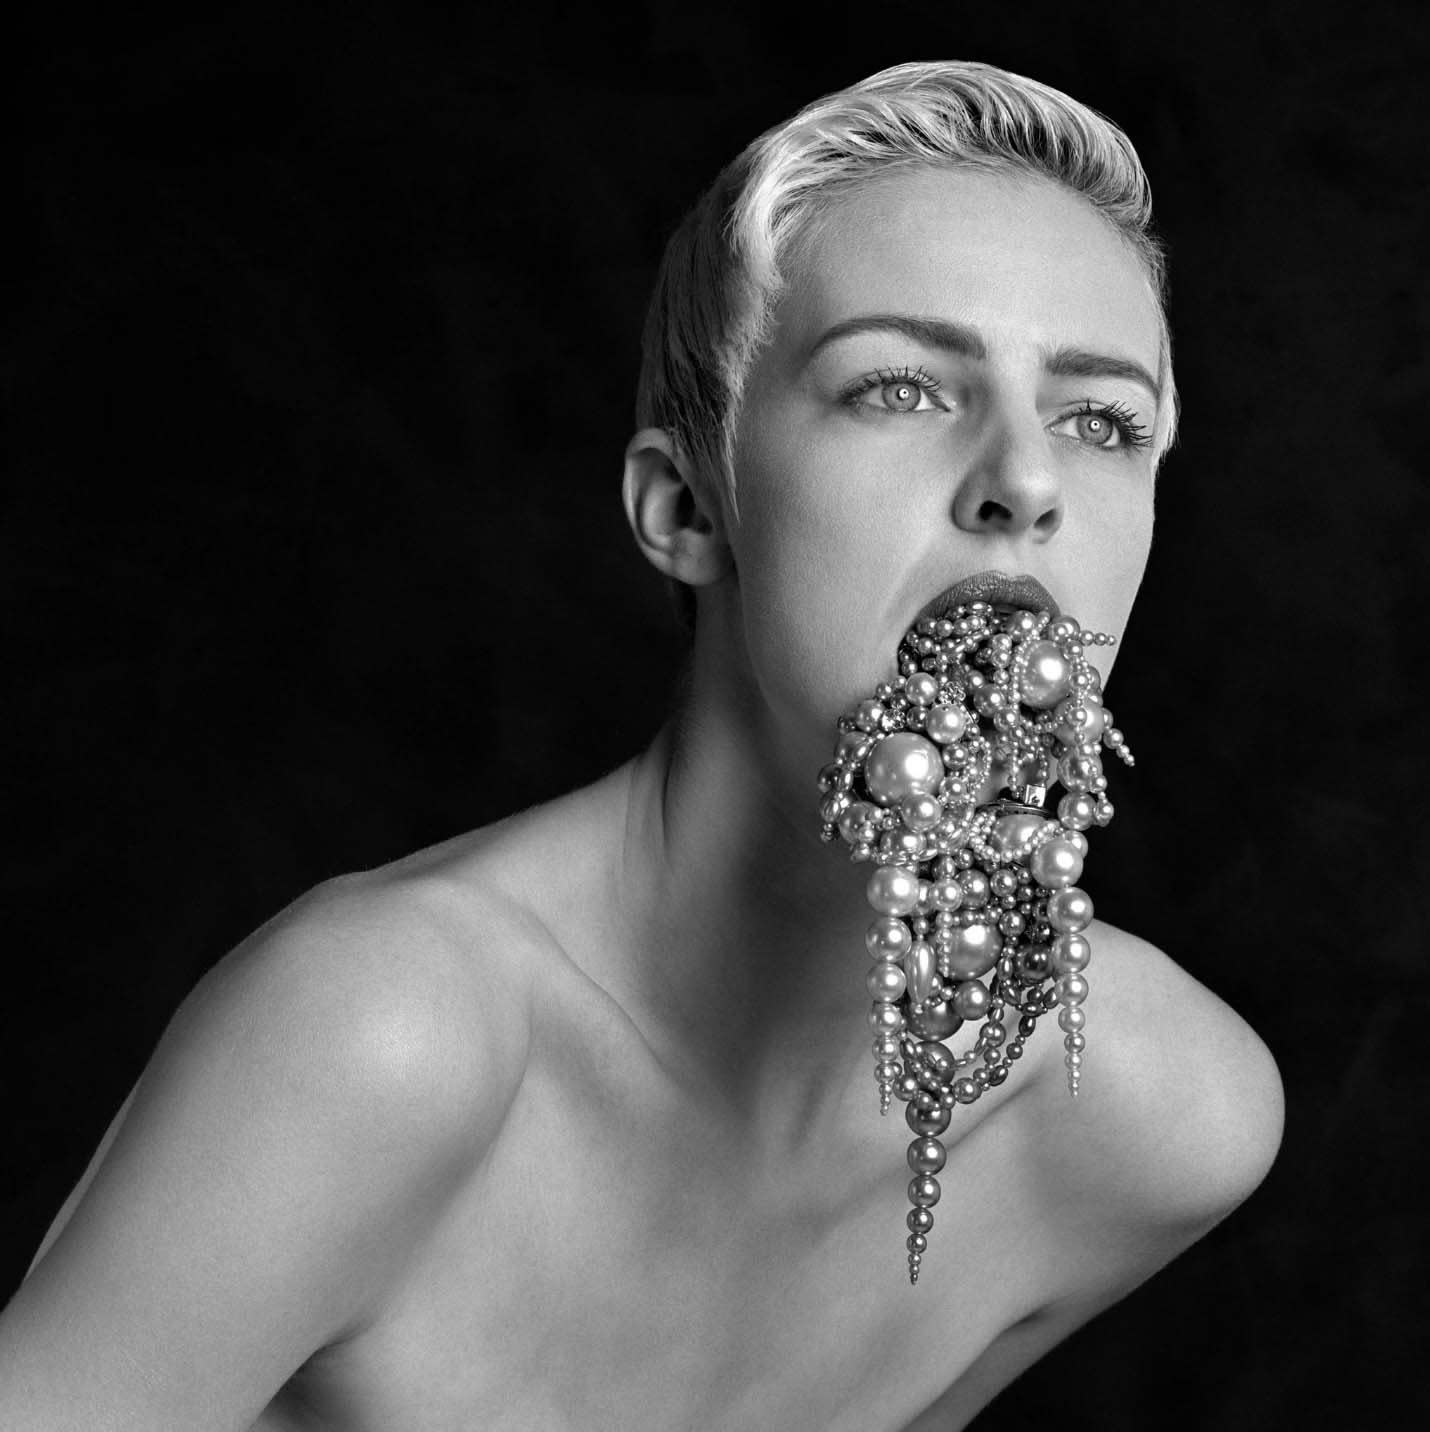 Erwin Olaf portrait of woman in black and white with pearls pouring out of her mouth